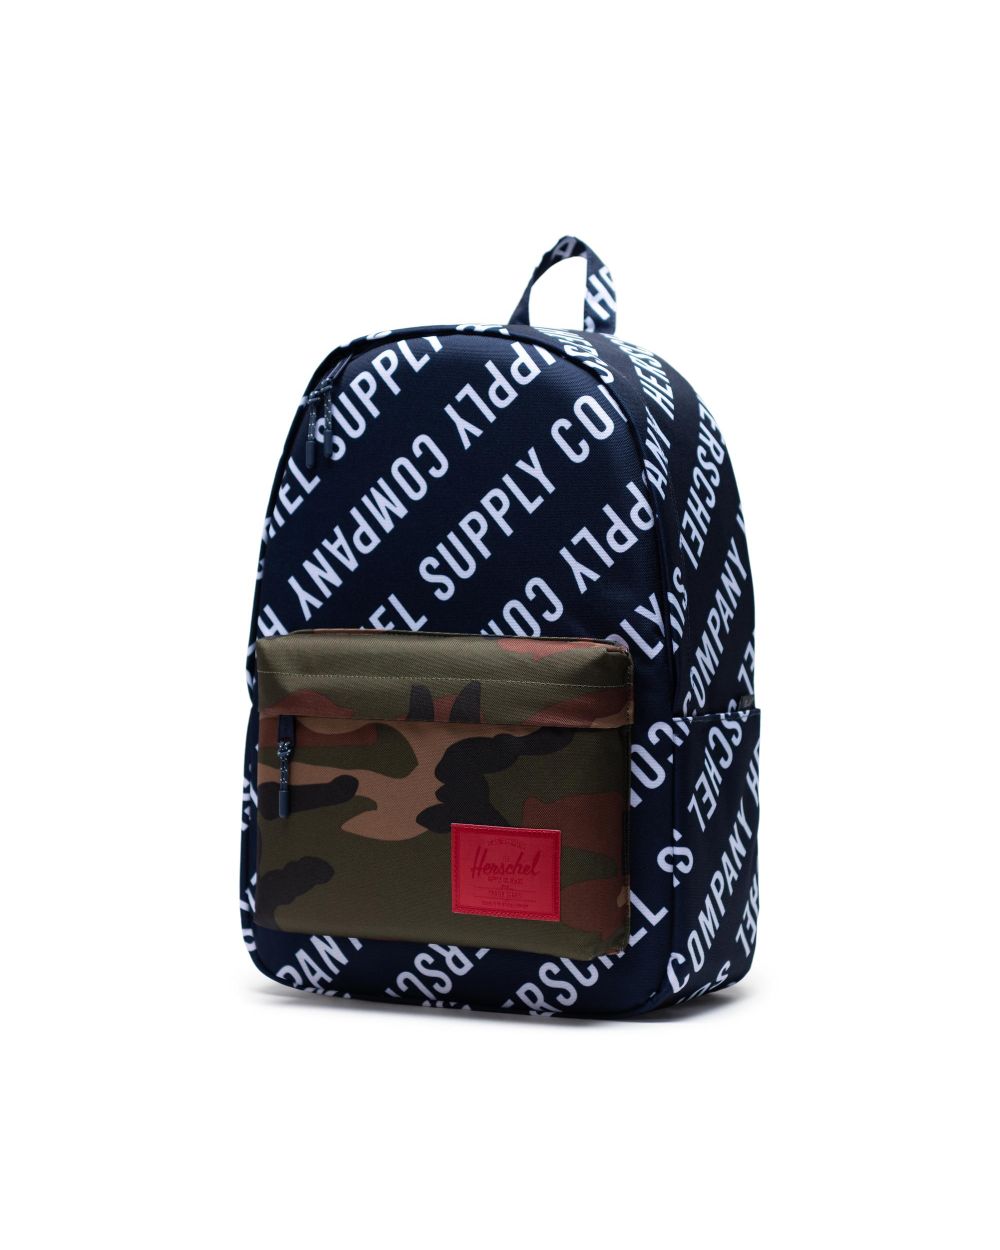 Herschel Supply Co. Classic Backpack XL - Roll Call Peacoat/Woodland Camo